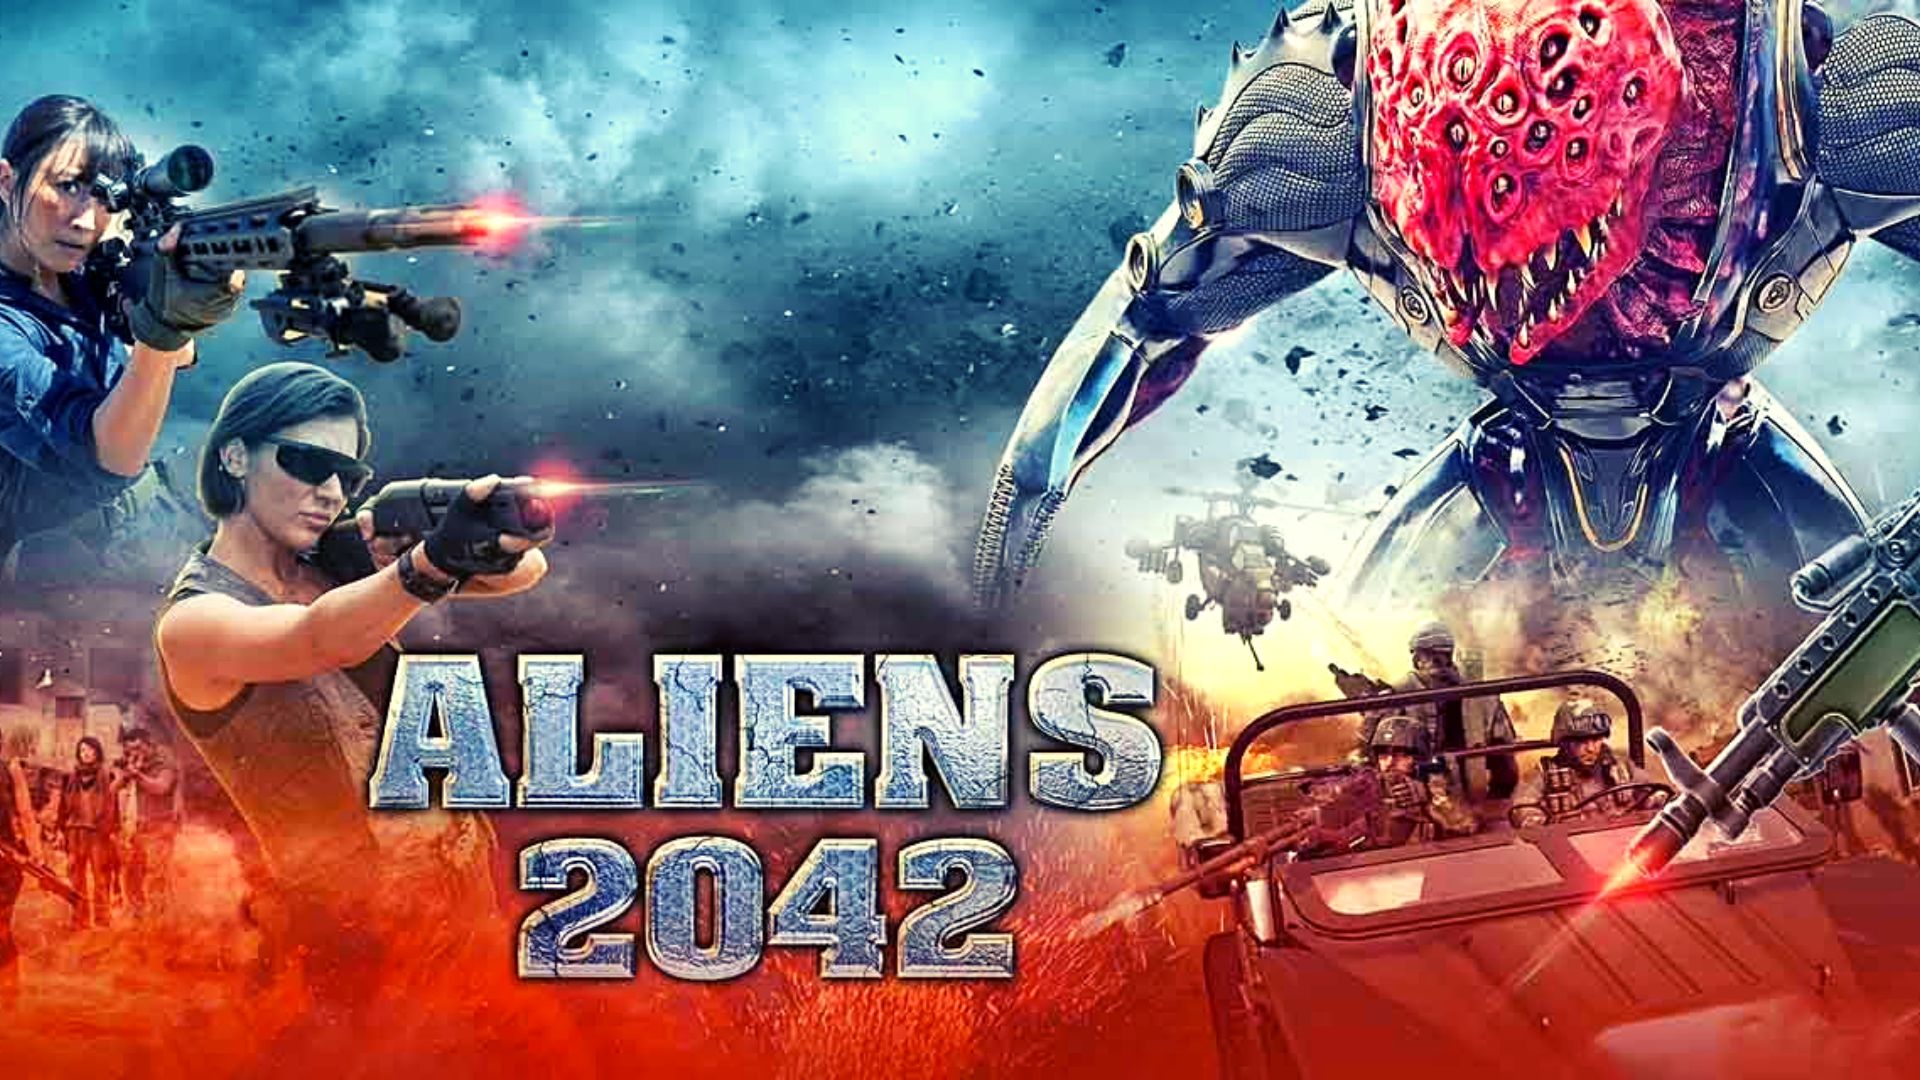 Aliens 2042 Movie Ticket Offers: Release Date, Cast & More